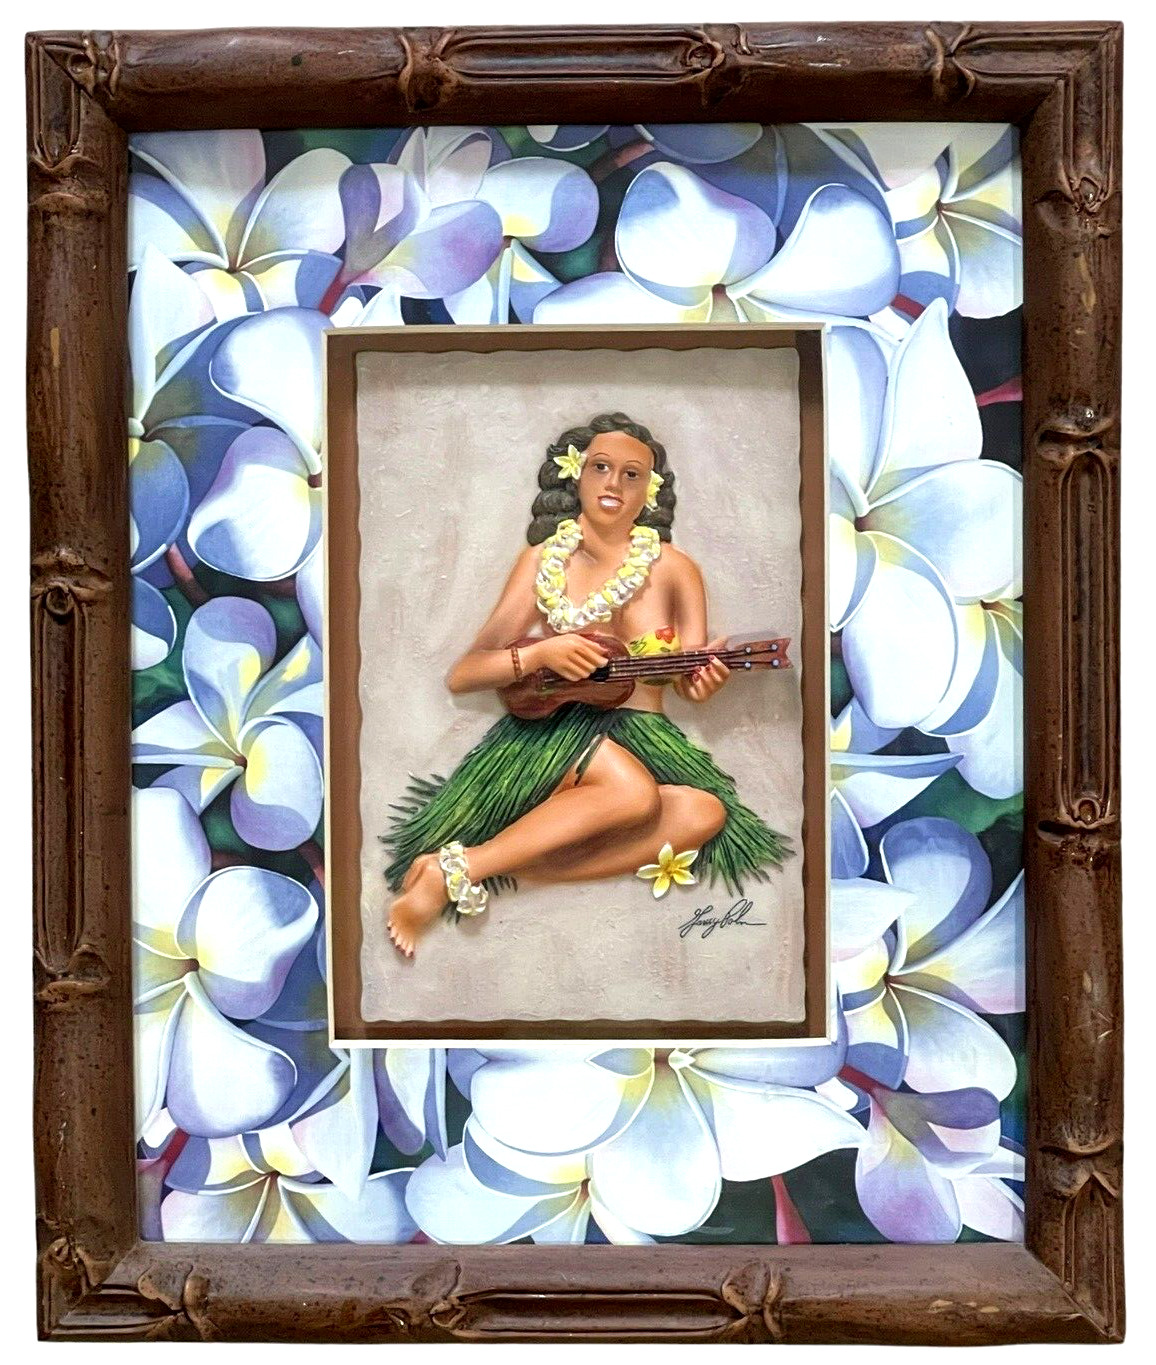 Garry Palm Hawaiian Ukulele Girl Pin Up 3D Matted Signed Framed Resin Shadow Box